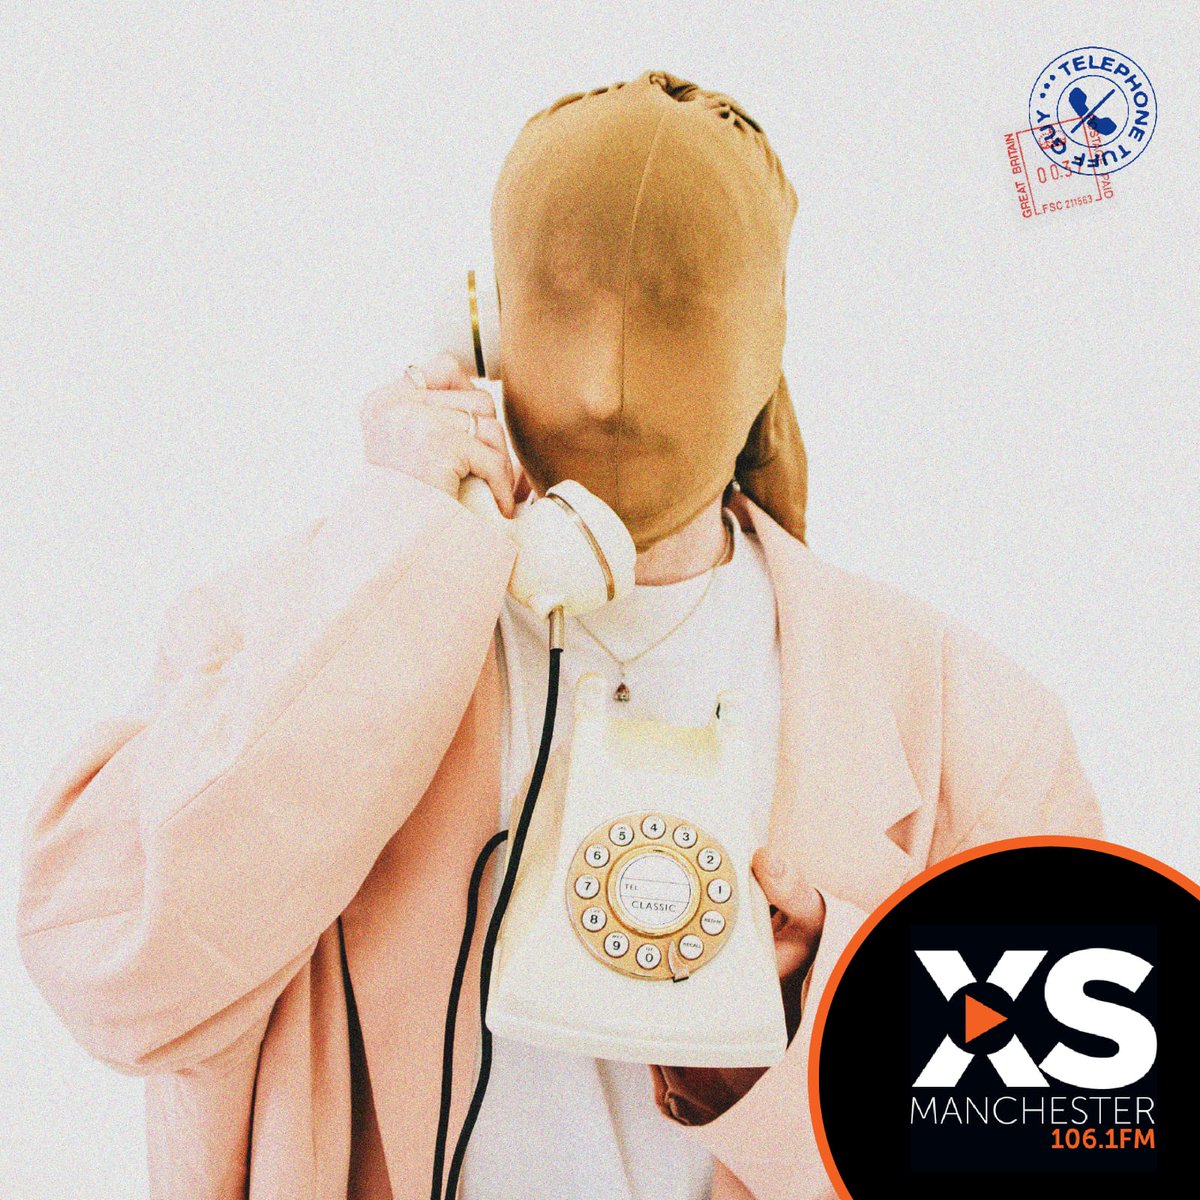 Massive thank you to @Mr_Jimbob for putting our new single Telephone Tuff Guy on his evening show list on @XSManchester 🙌🔥 Tune into XS Manchester this coming week to hear an early spin of our next single 😎 Telephone Tuff Guy is out Wednesday 27th March 📱 BARSTAFF x